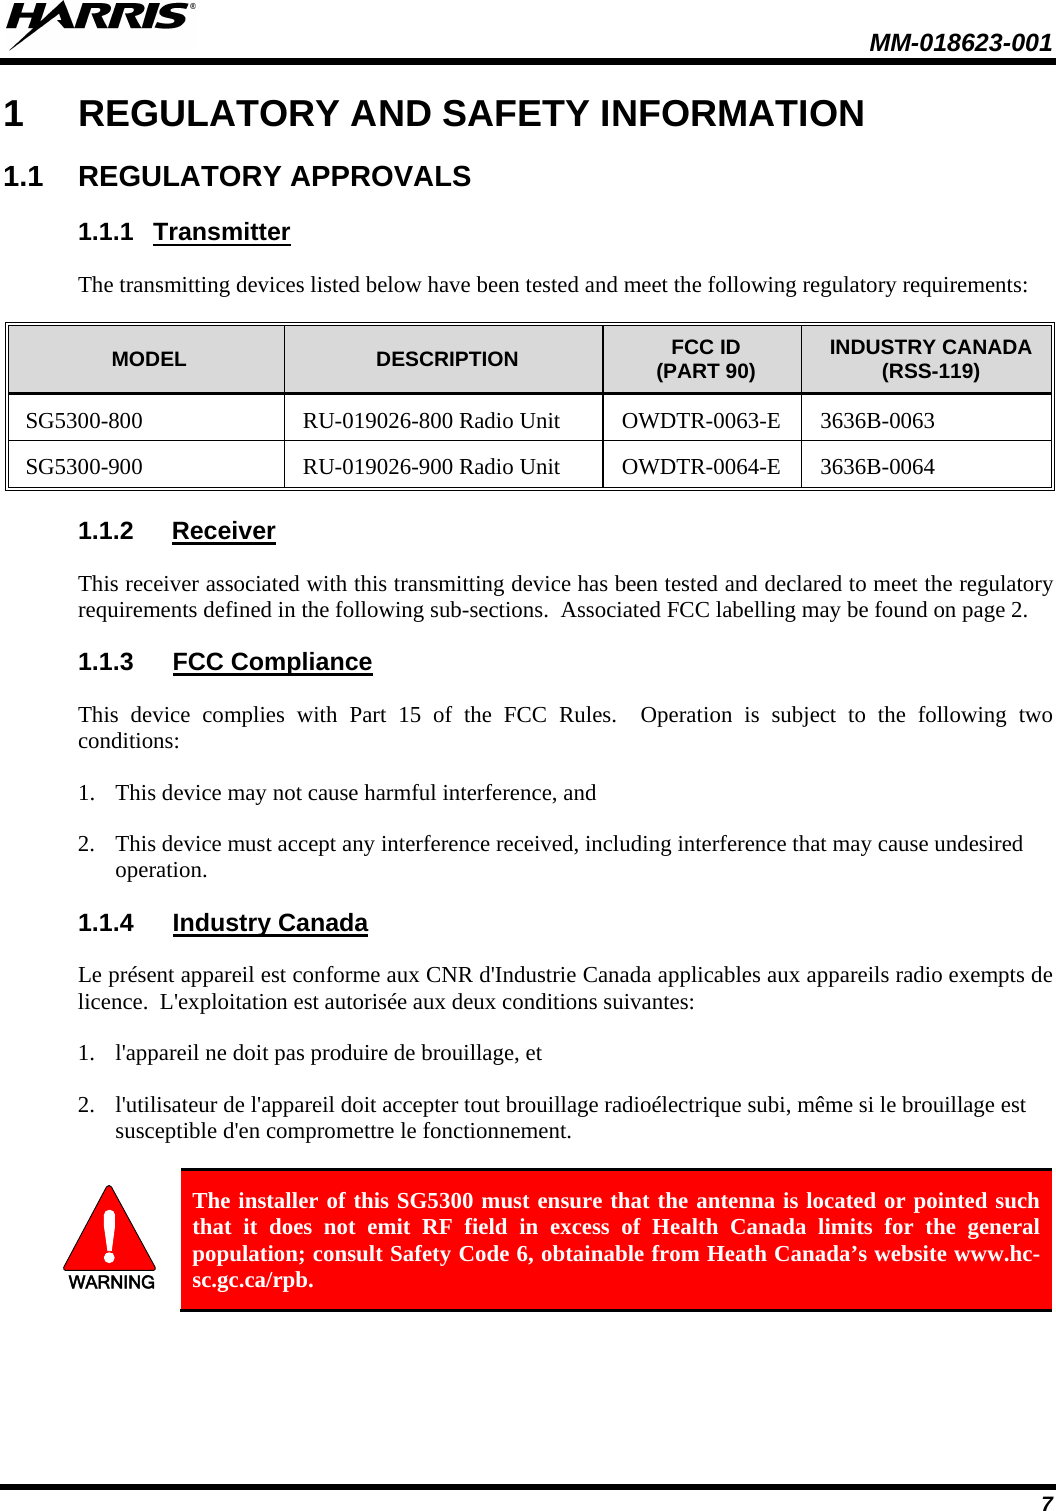  MM-018623-001   7 1  REGULATORY AND SAFETY INFORMATION 1.1 REGULATORY APPROVALS 1.1.1 Transmitter The transmitting devices listed below have been tested and meet the following regulatory requirements:  MODEL DESCRIPTION FCC ID (PART 90) INDUSTRY CANADA (RSS-119) SG5300-800  RU-019026-800 Radio Unit OWDTR-0063-E  3636B-0063 SG5300-900  RU-019026-900 Radio Unit OWDTR-0064-E  3636B-0064 1.1.2 Receiver This receiver associated with this transmitting device has been tested and declared to meet the regulatory requirements defined in the following sub-sections.  Associated FCC labelling may be found on page 2. 1.1.3 FCC Compliance This device complies with Part 15 of the FCC Rules.  Operation is subject to the following two conditions:  1. This device may not cause harmful interference, and  2. This device must accept any interference received, including interference that may cause undesired operation. 1.1.4 Industry Canada Le présent appareil est conforme aux CNR d&apos;Industrie Canada applicables aux appareils radio exempts de licence.  L&apos;exploitation est autorisée aux deux conditions suivantes:  1. l&apos;appareil ne doit pas produire de brouillage, et  2. l&apos;utilisateur de l&apos;appareil doit accepter tout brouillage radioélectrique subi, même si le brouillage est susceptible d&apos;en compromettre le fonctionnement.  WARNING The installer of this SG5300 must ensure that the antenna is located or pointed such that it does not emit RF field in excess of Health Canada limits for the general population; consult Safety Code 6, obtainable from Heath Canada’s website www.hc-sc.gc.ca/rpb. 